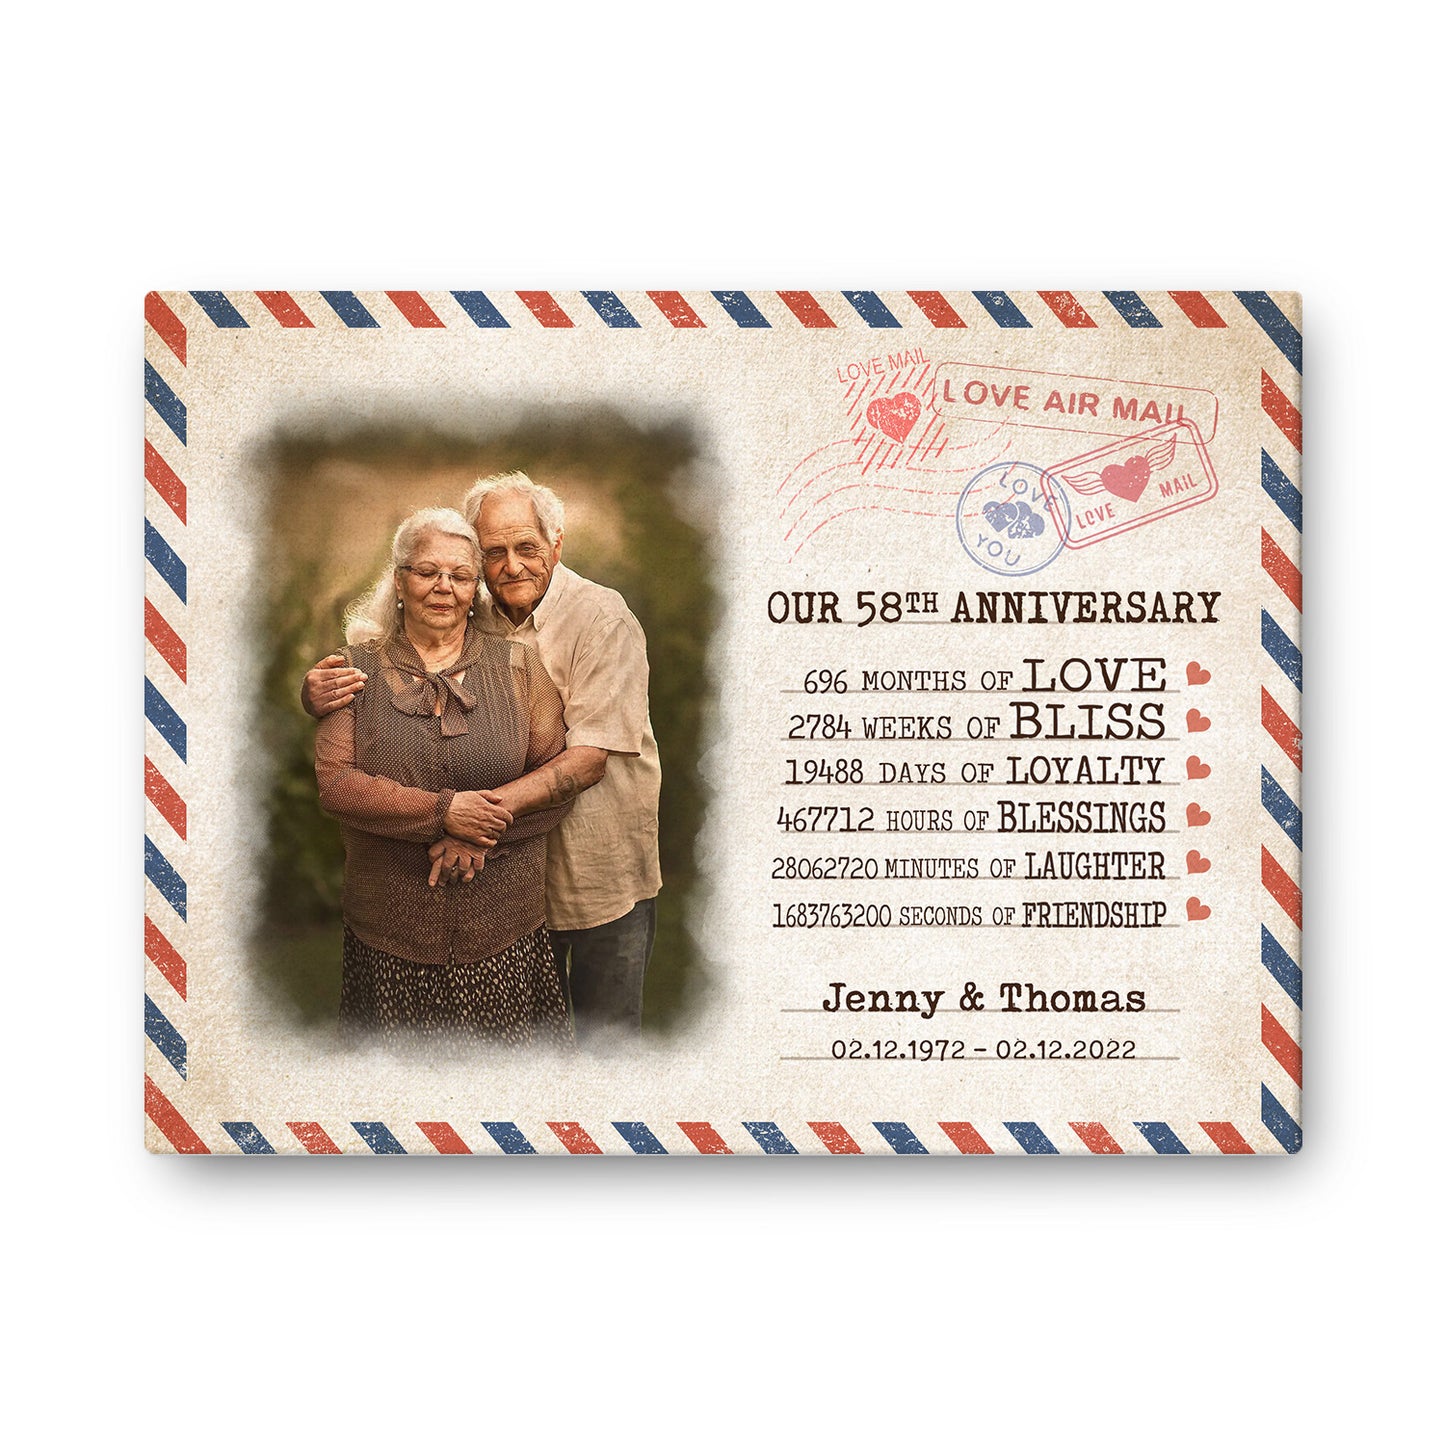 Our 58th Anniversary Letter Valentine Gift Personalized Canvas